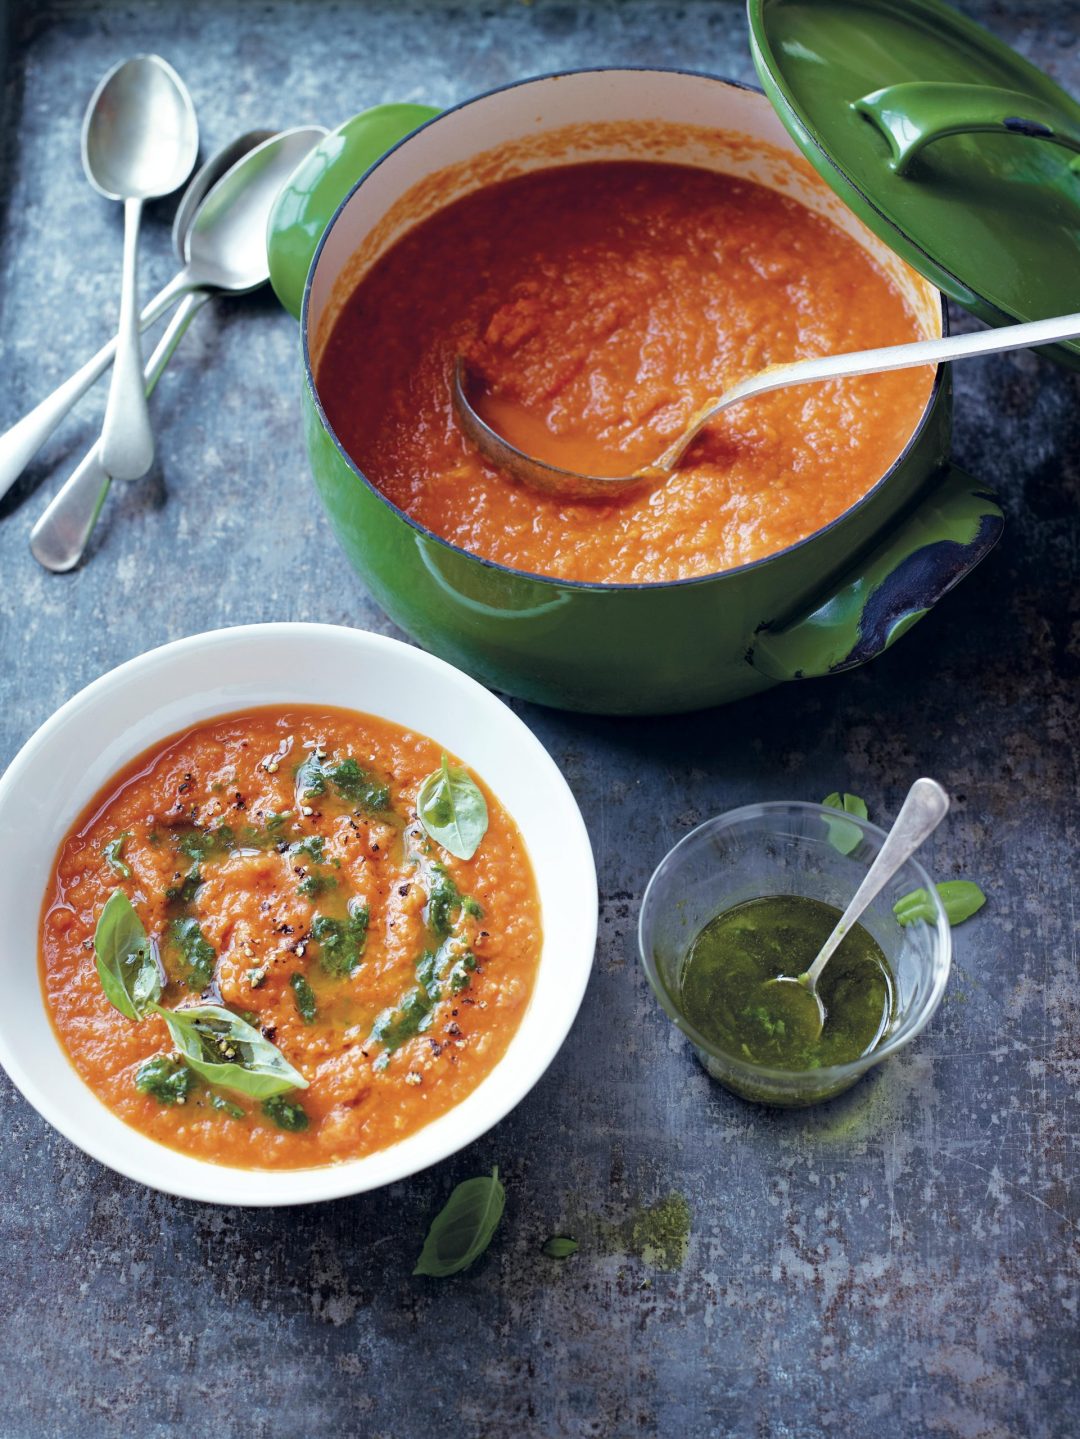 Tomato soup with fennel, garlic and basil drizzle